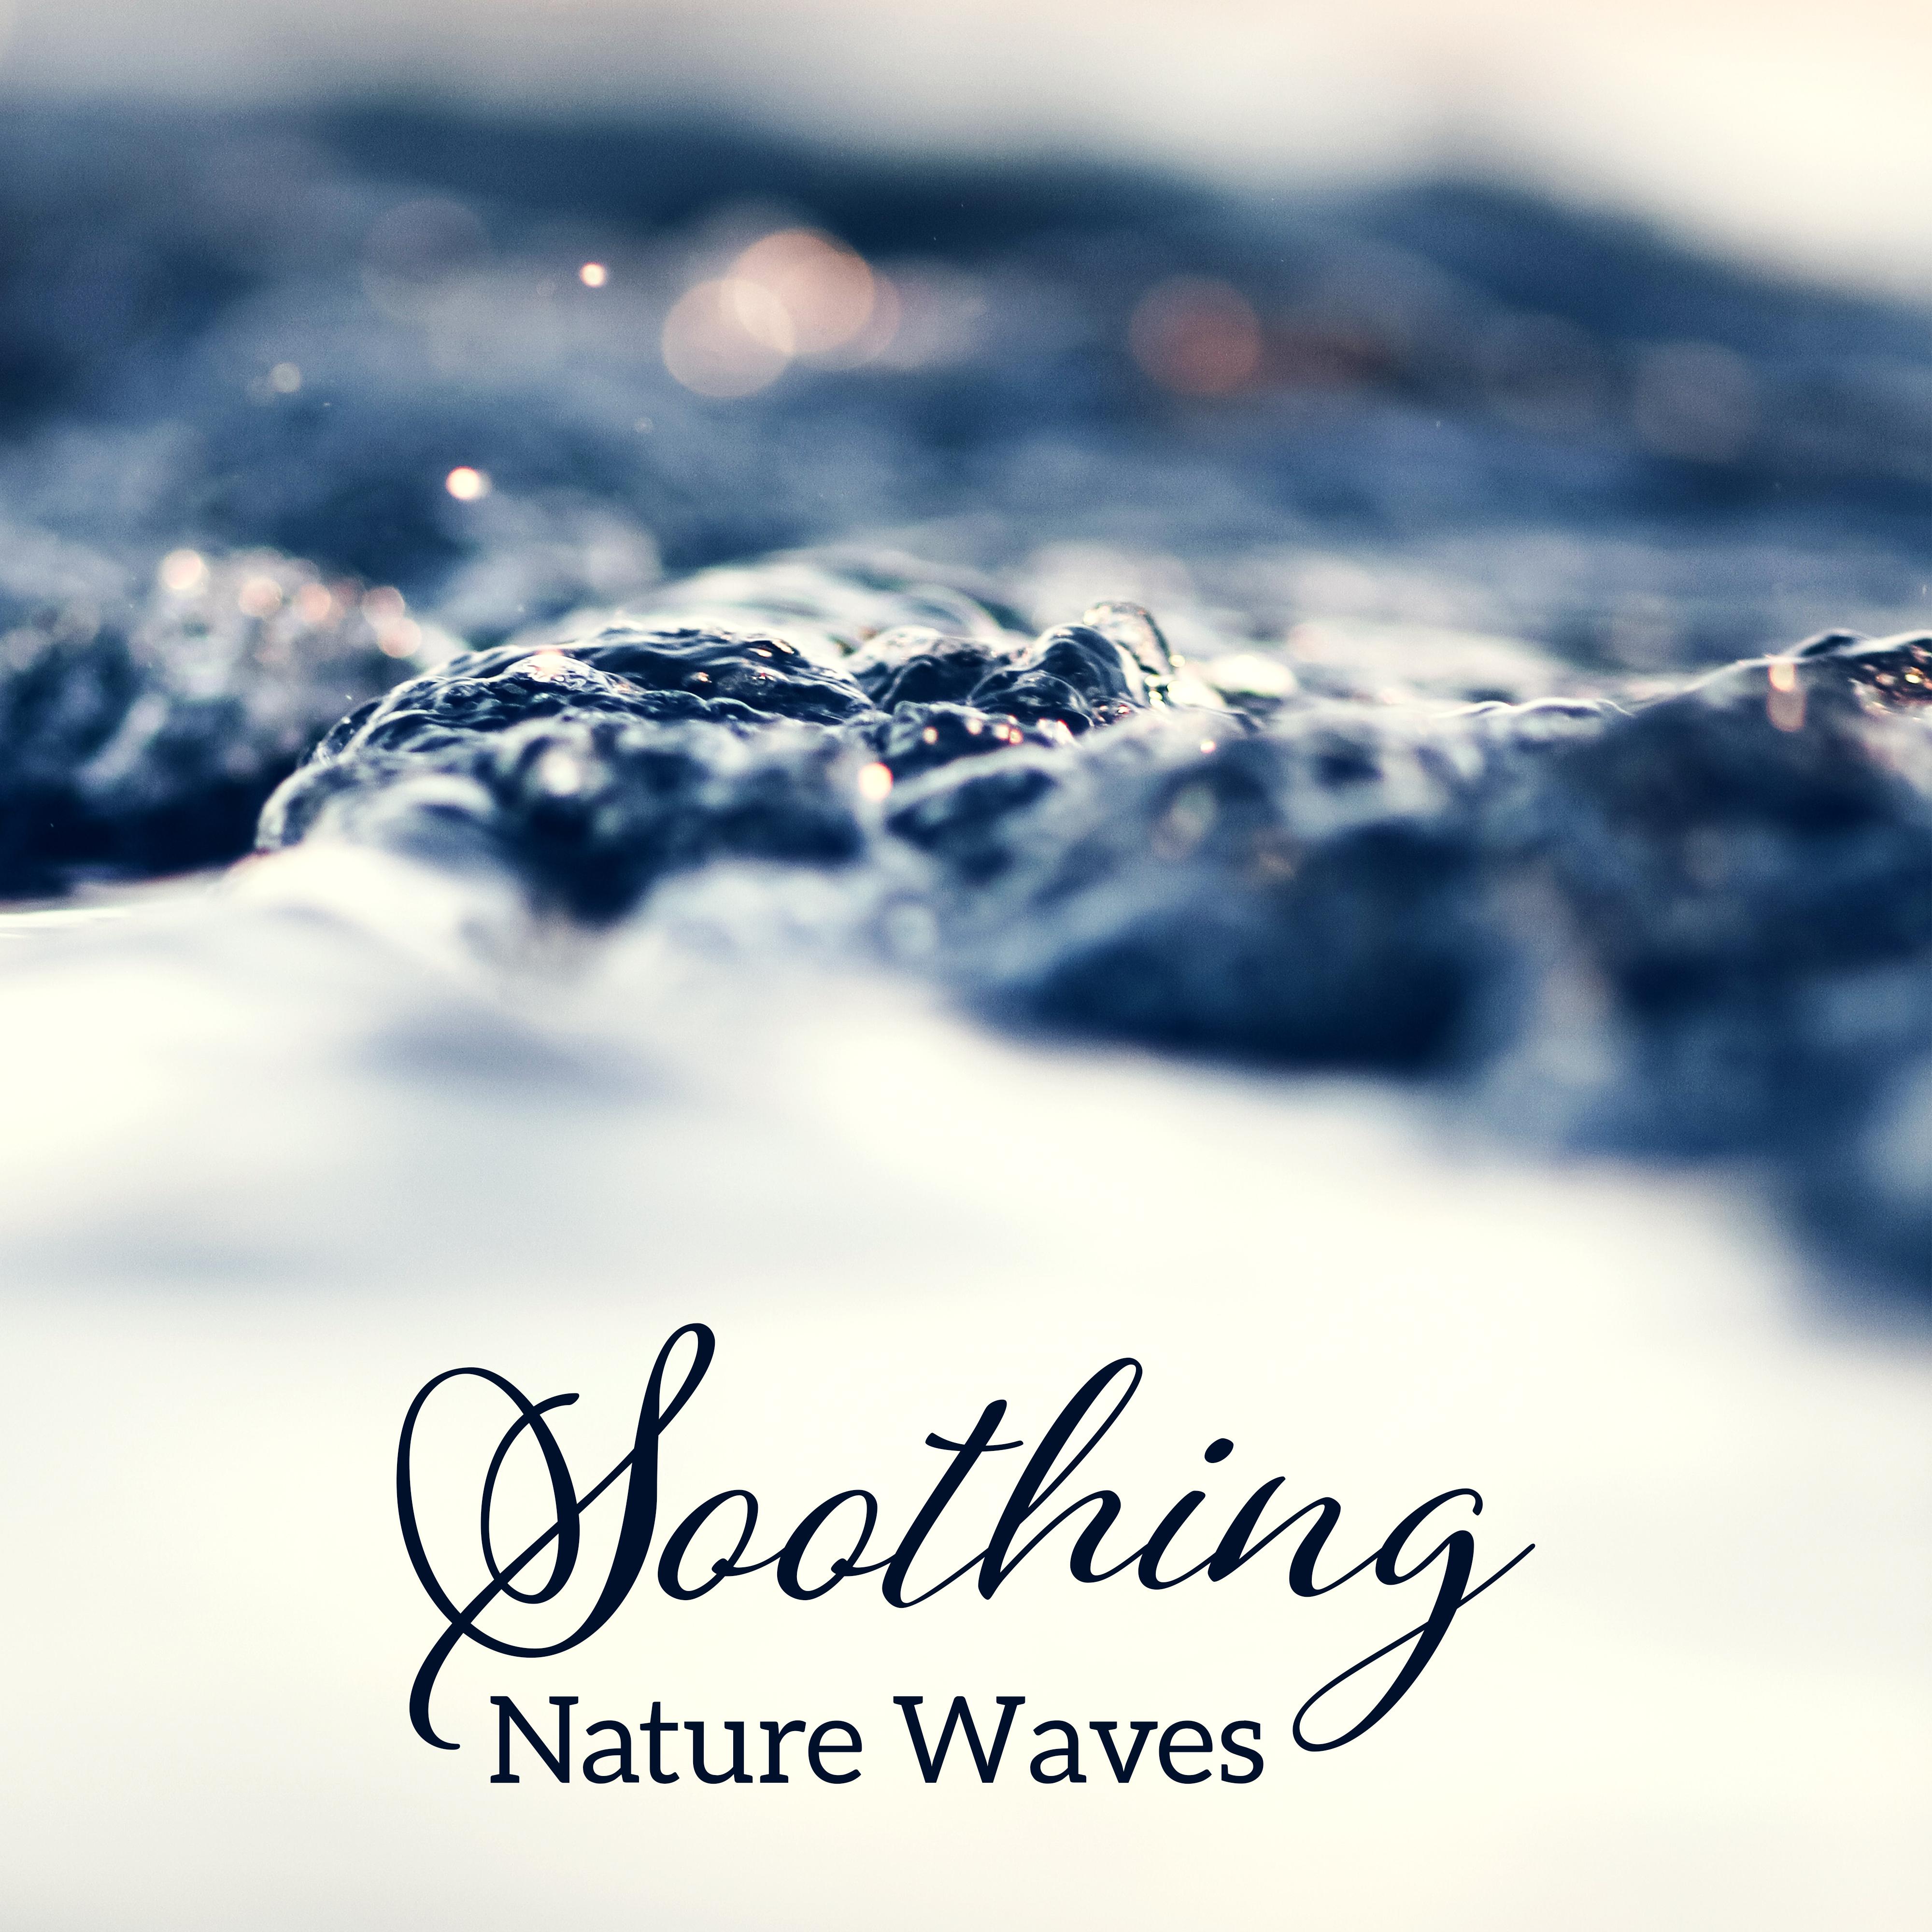 Soothing Nature Waves – Soft & Calm Waves to Relax, Nature Music, Sounds for Peaceful Mind